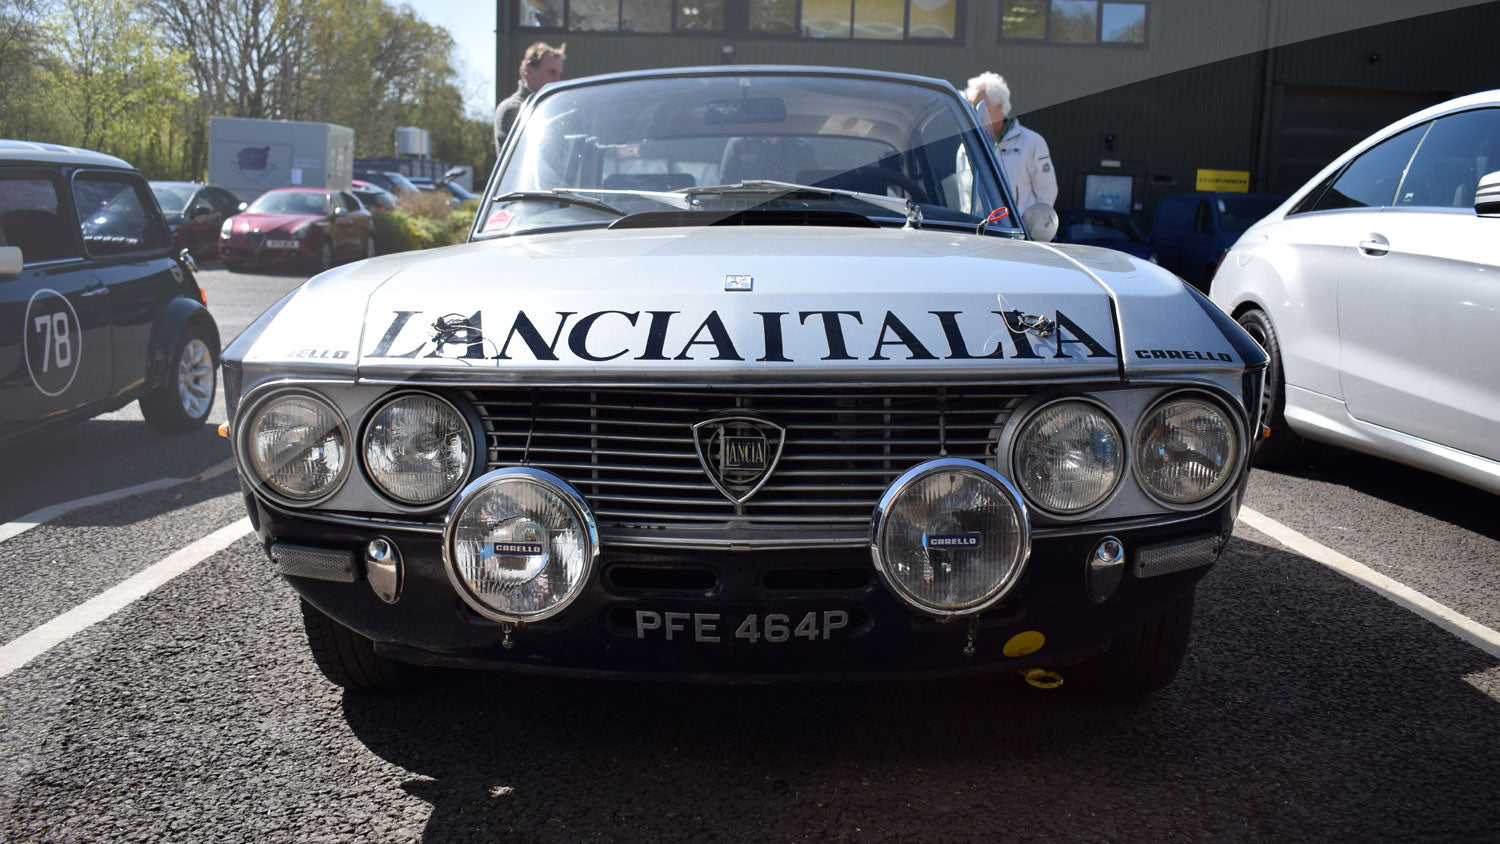 Heritage Exhaust for the Spectacular Lancia Fulvia